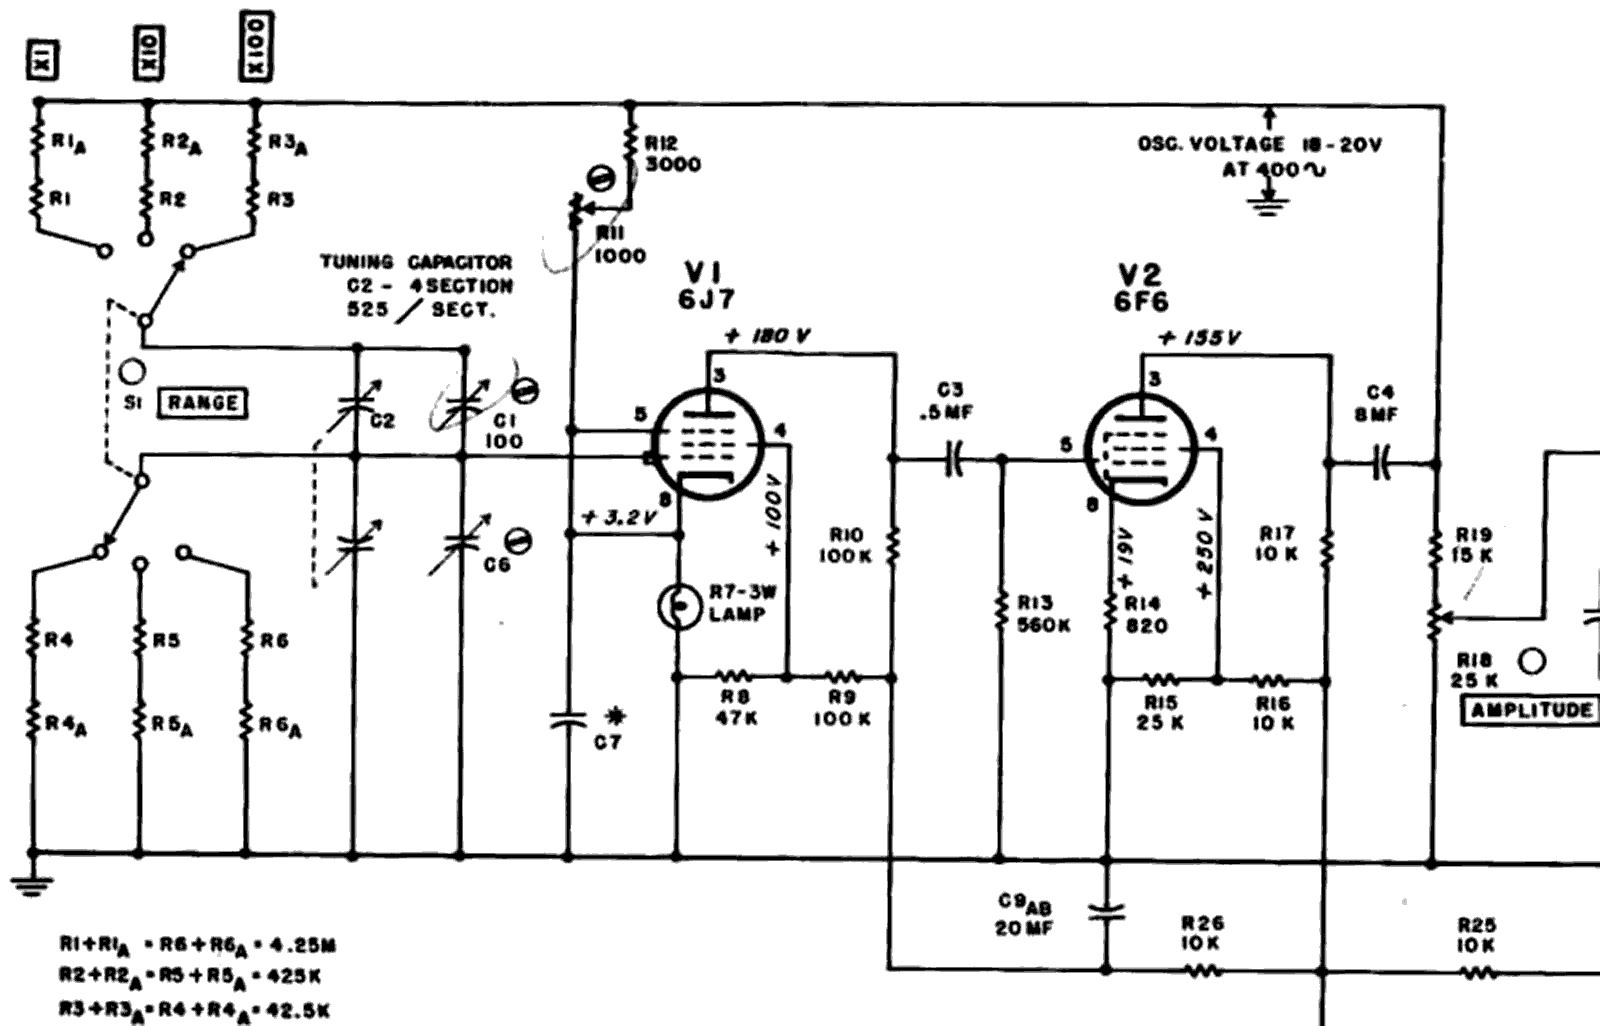 Partial schematic of the Model 200A. Lamp R7 operated as a negative feedback element by thermally regulating the current to the cathode in V1.